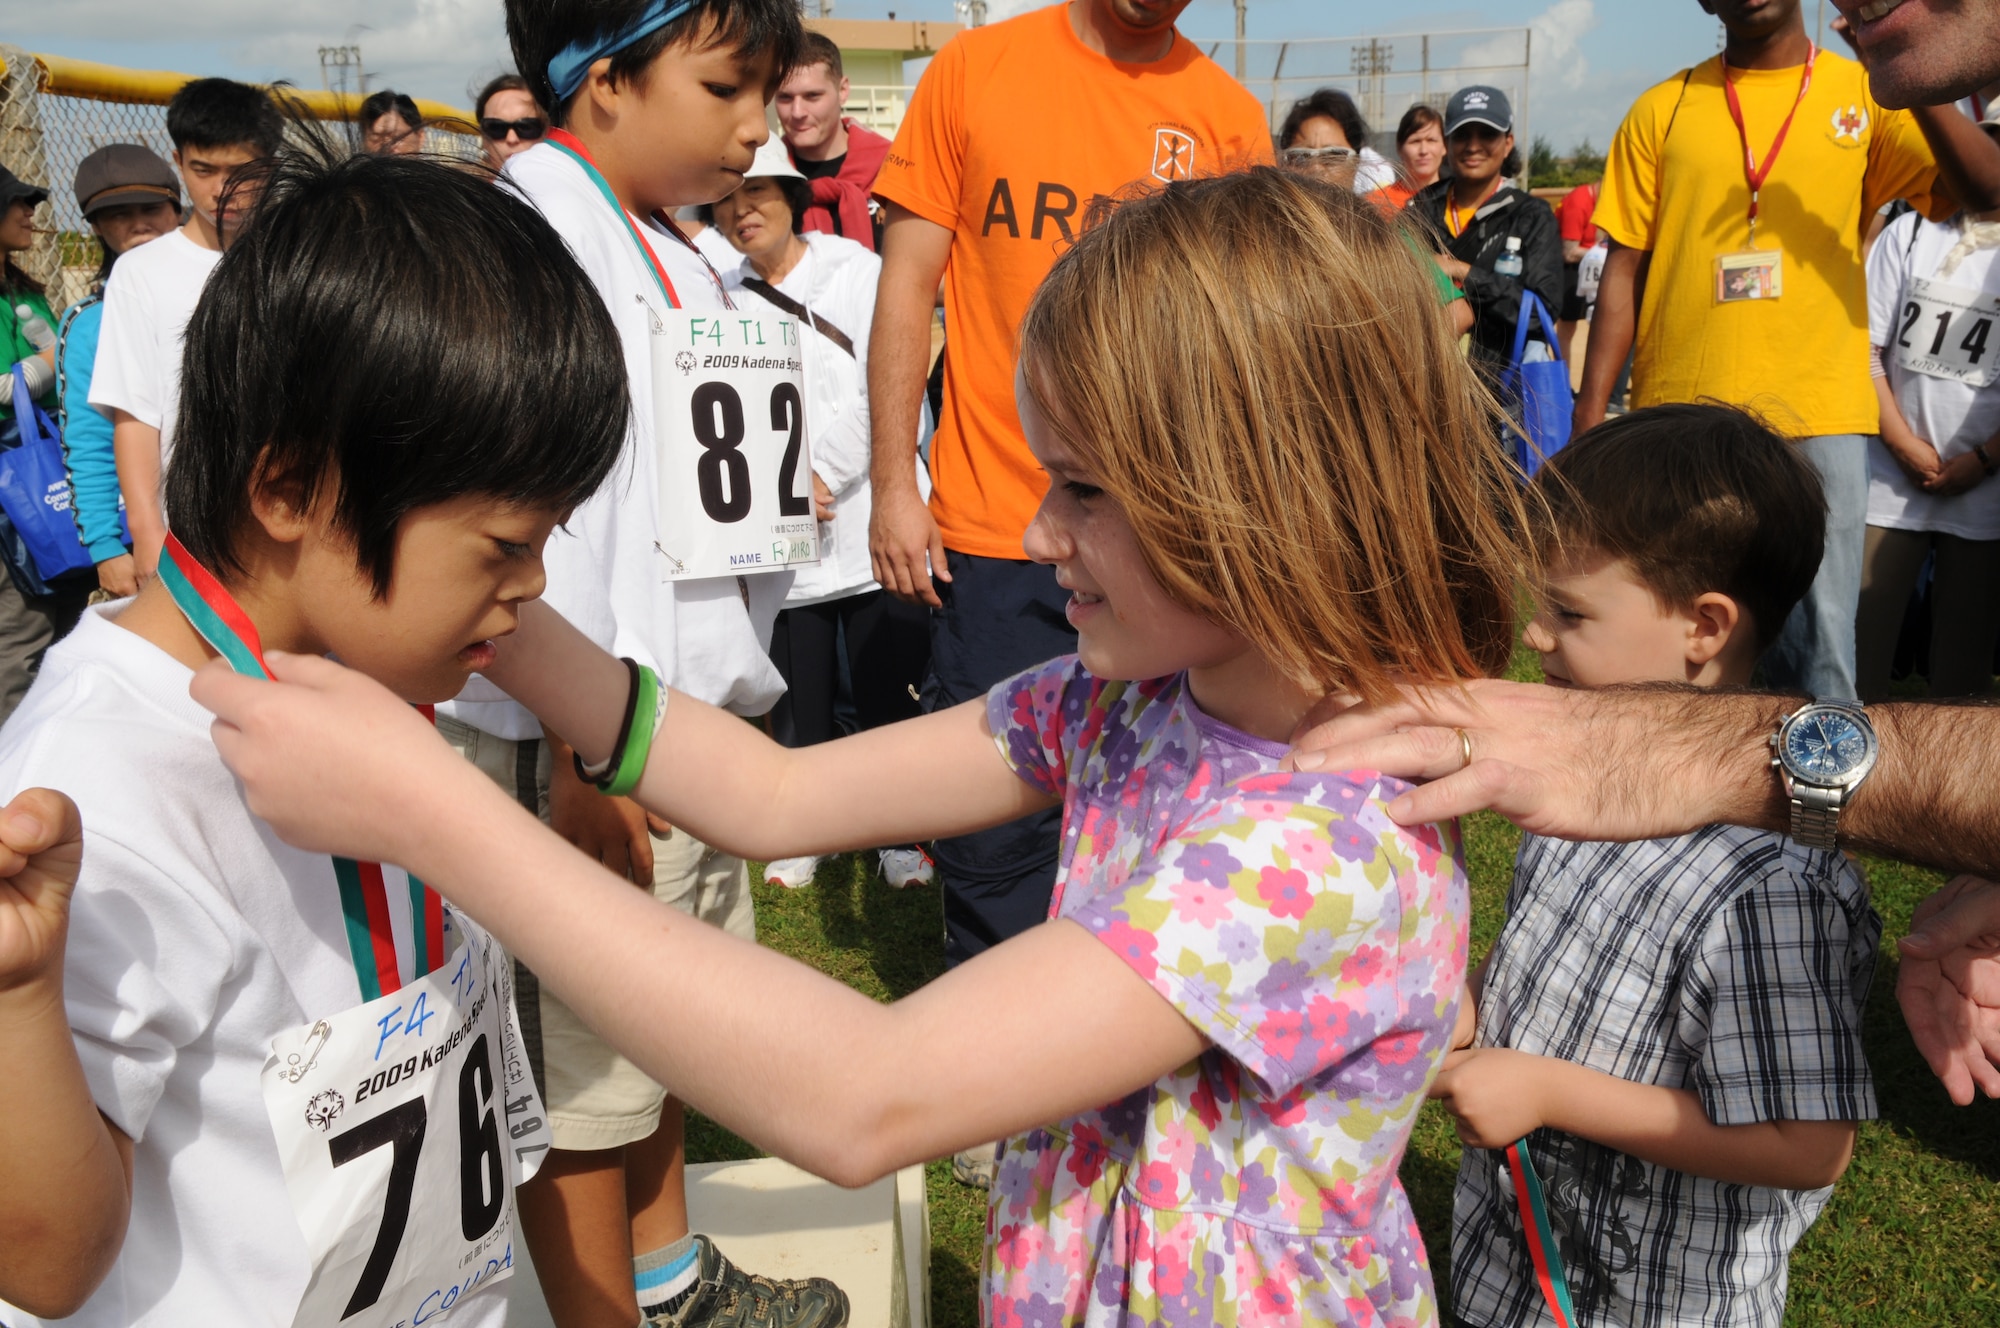 A young girl places a medal over an Okinawan athlete after competing in the 30 meter dash during the Kadena Special Olympics Nov. 14, 2009, Kadena Air Base, Japan. Kadena hosted the 10th Annual Special Olympic Games and Art Festival for special needs Okinawan and American adult and child athletes.
(U.S. Air Force photo/Airman 1st Class Amanda Grabiec) 